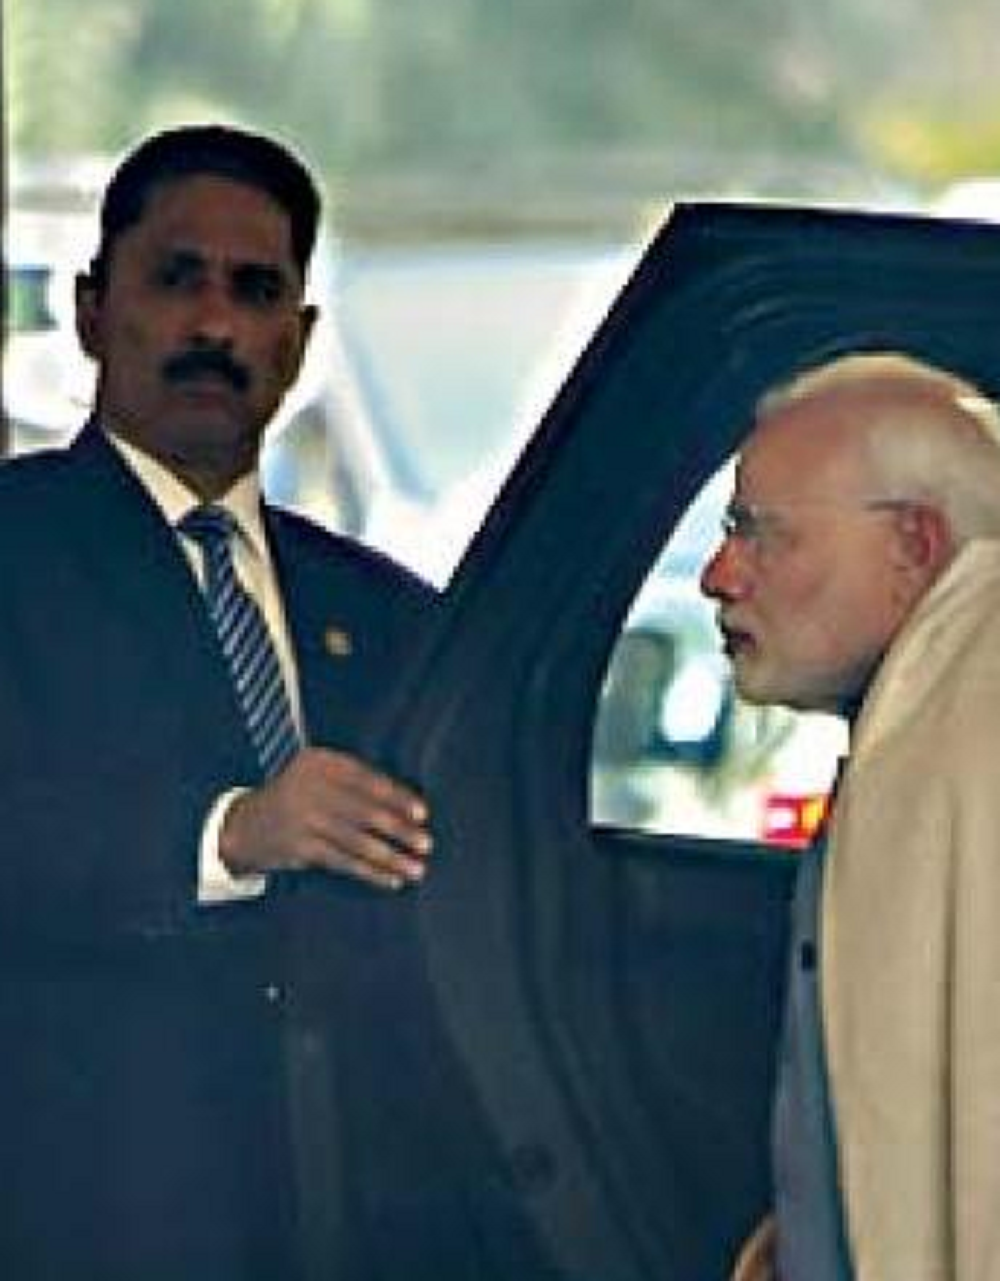 Rs 1.62 crore a day: Cost of PM Modi's SPG security cover - India Today